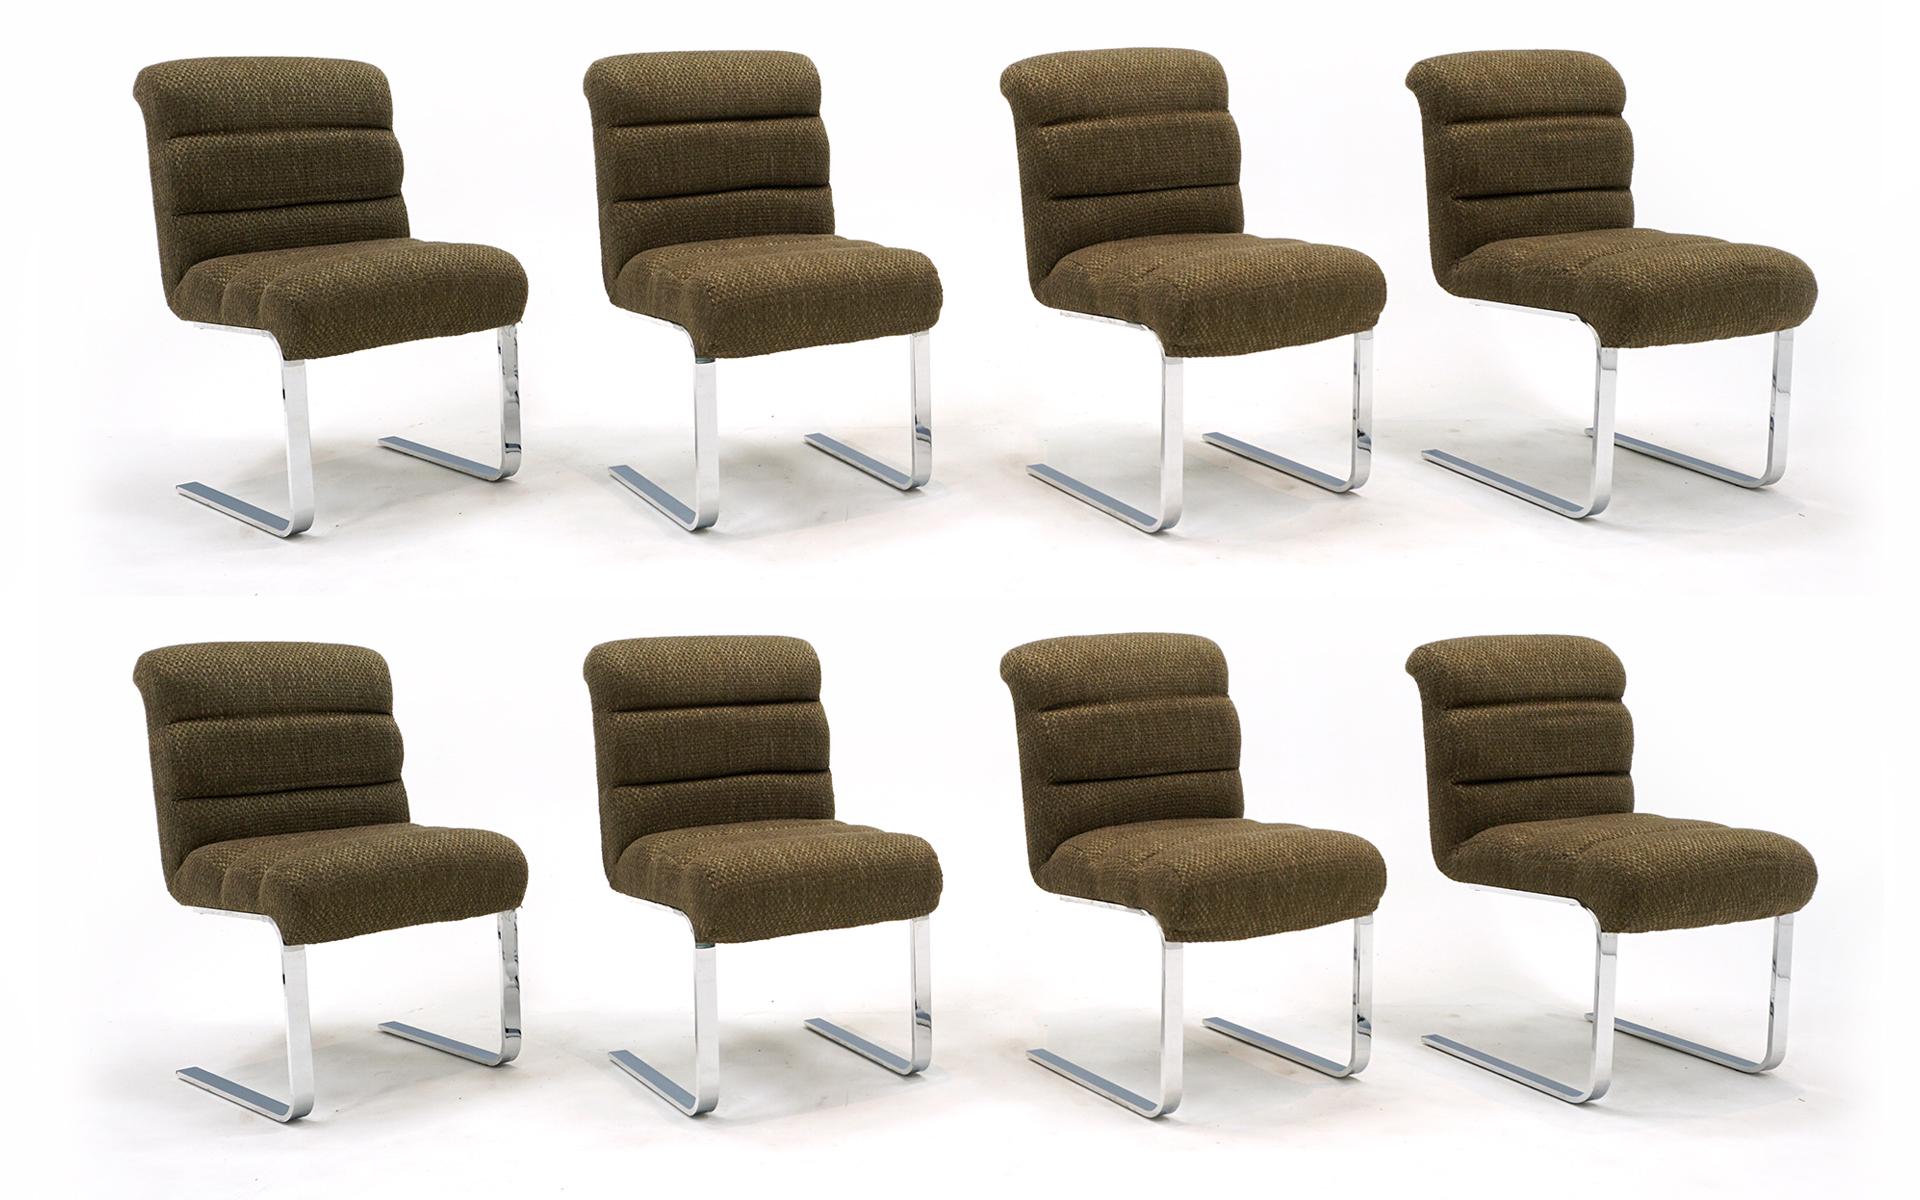 Set of 8 dining chairs from The Pace Collection, 1970s.  Soft comfortable seats and backs with cantilever frame designed to give a subtle flex when seated.  Very good original condition.  Signed with the Pace Collection label.